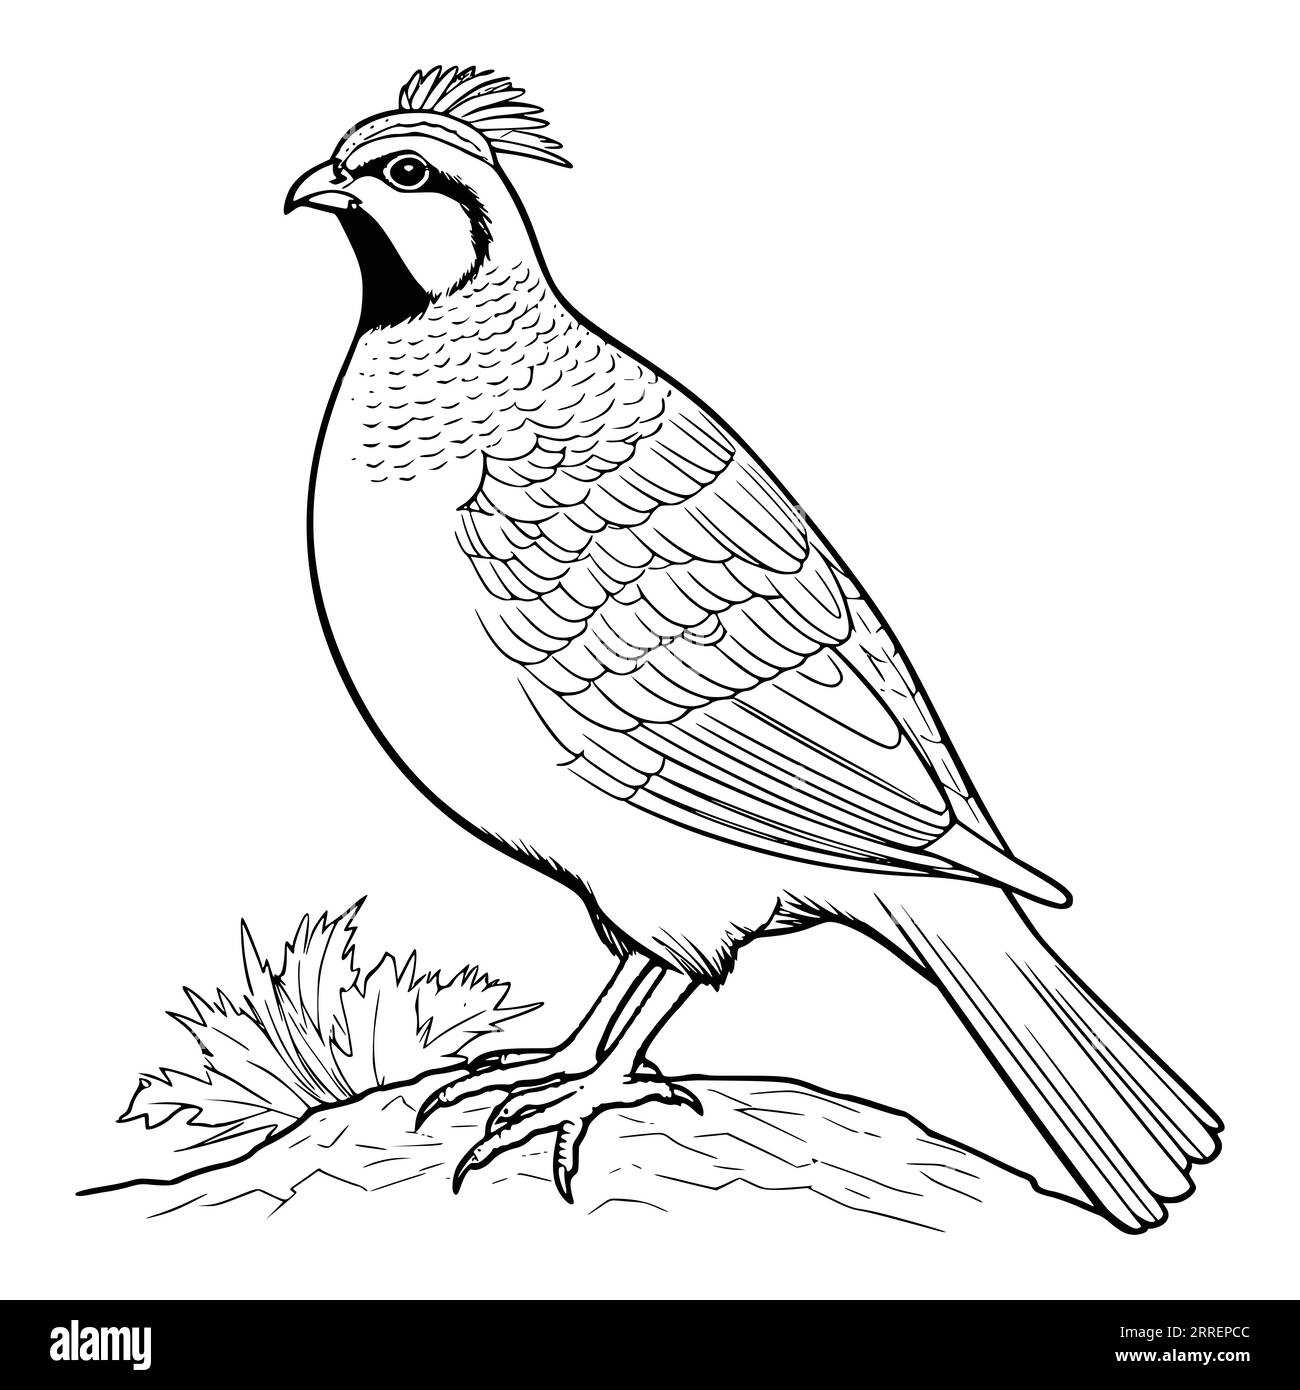 Quail Coloring Page for Kids Stock Vector